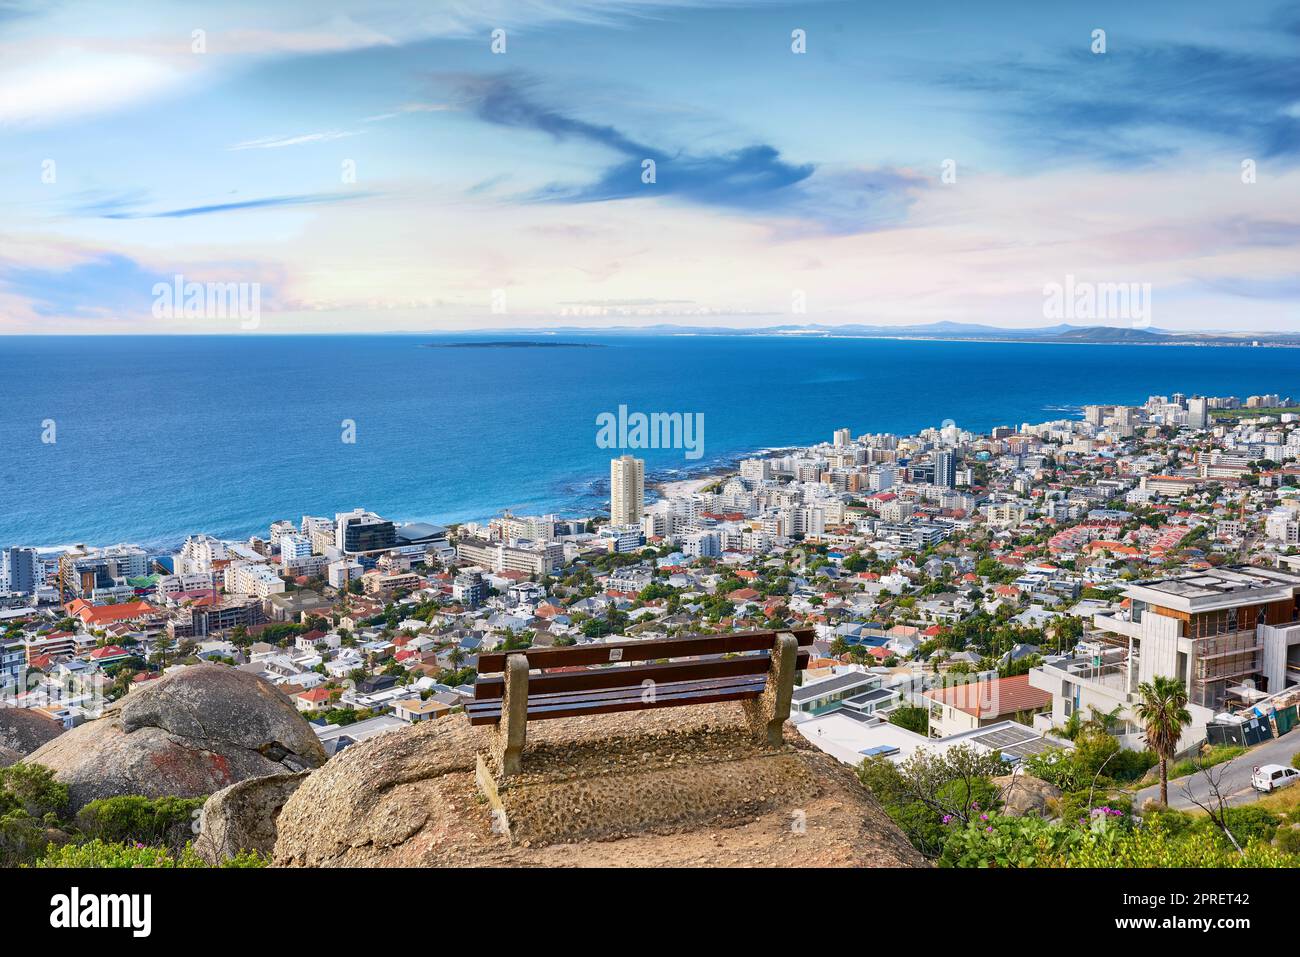 Sea Point - Cape Town. Aerial view of Sea Point, Cape Town, South Africa. Stock Photo